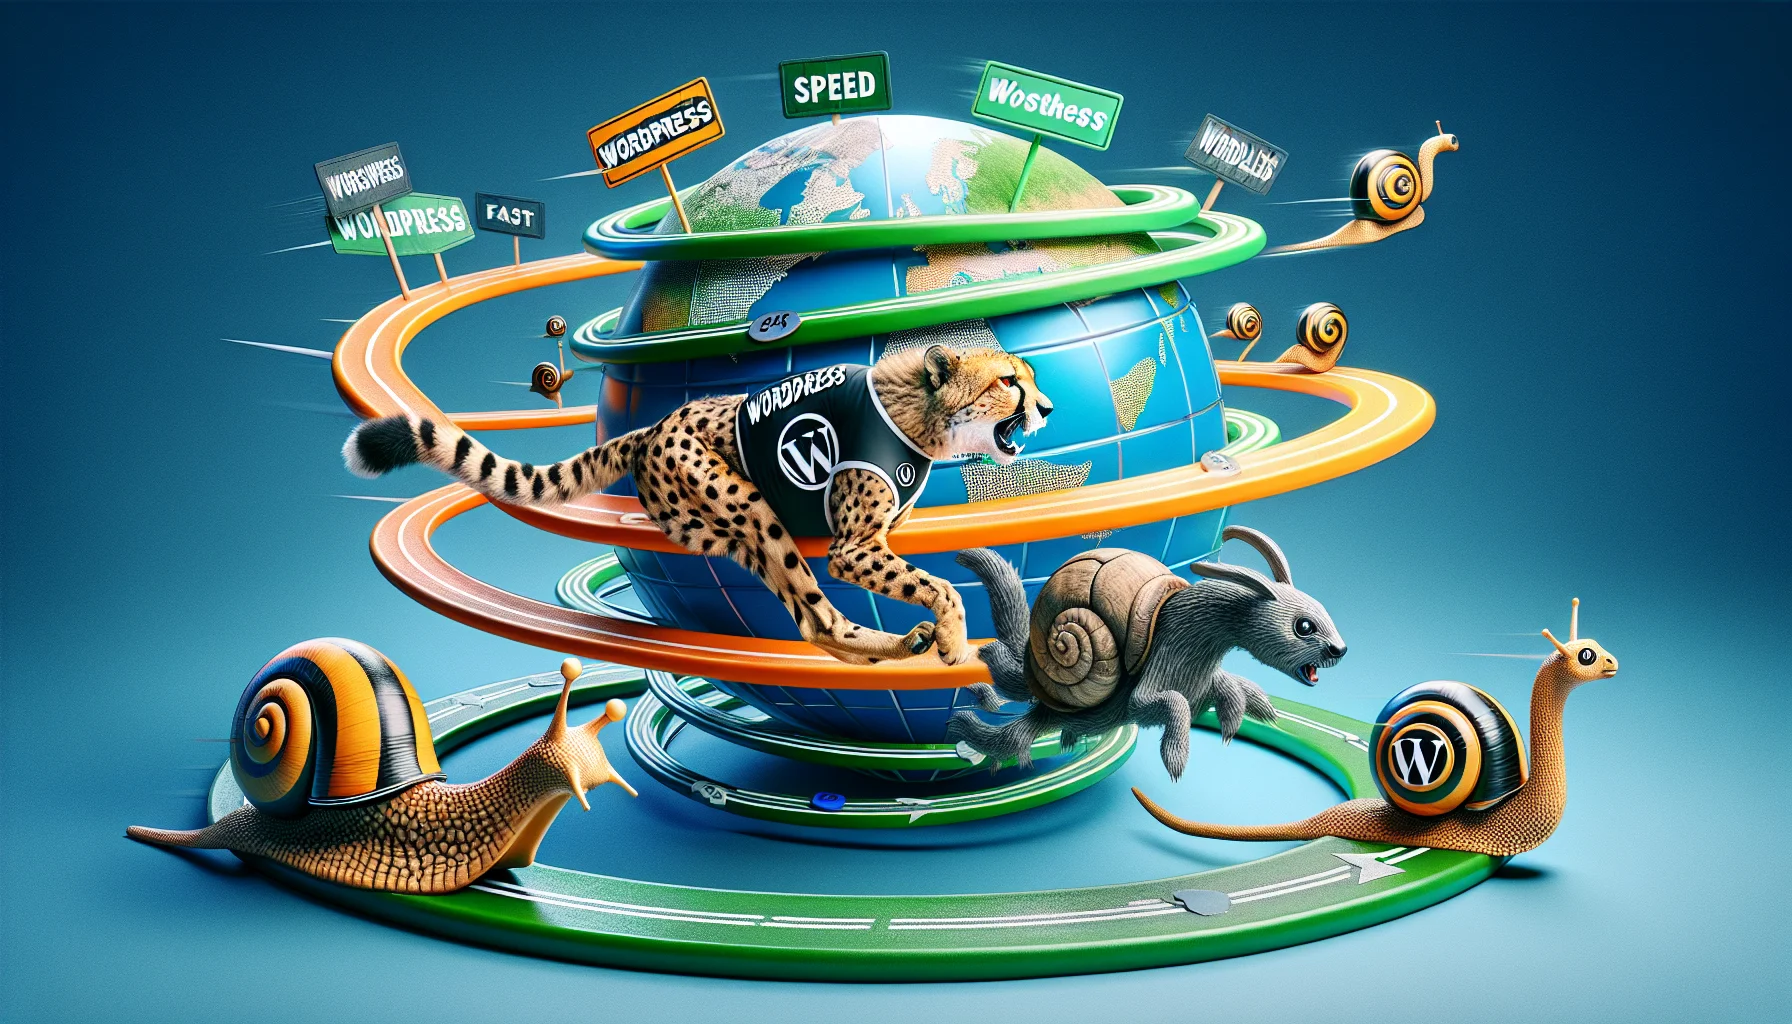 Create a creative and humorous image showcasing an abstract idea of a speed race. In this image, visualize different animals representing different types of web hosting. A cheetah, known for its speed, is representing fast WordPress hosting. The other animals, a snail and a tortoise, representing slower web hosting options, are clearly lagging behind. The animals are racing on a makeshift track that intertwines and spirals around a humorous interpretation of the globe, depicting the worldwide aspect of web hosting. Display the word 'WordPress' on the cheetah's racing jersey and the hint of a trademark logo to imply WordPress hosting. However, avoid any actual brand logos to respect copyright policies.